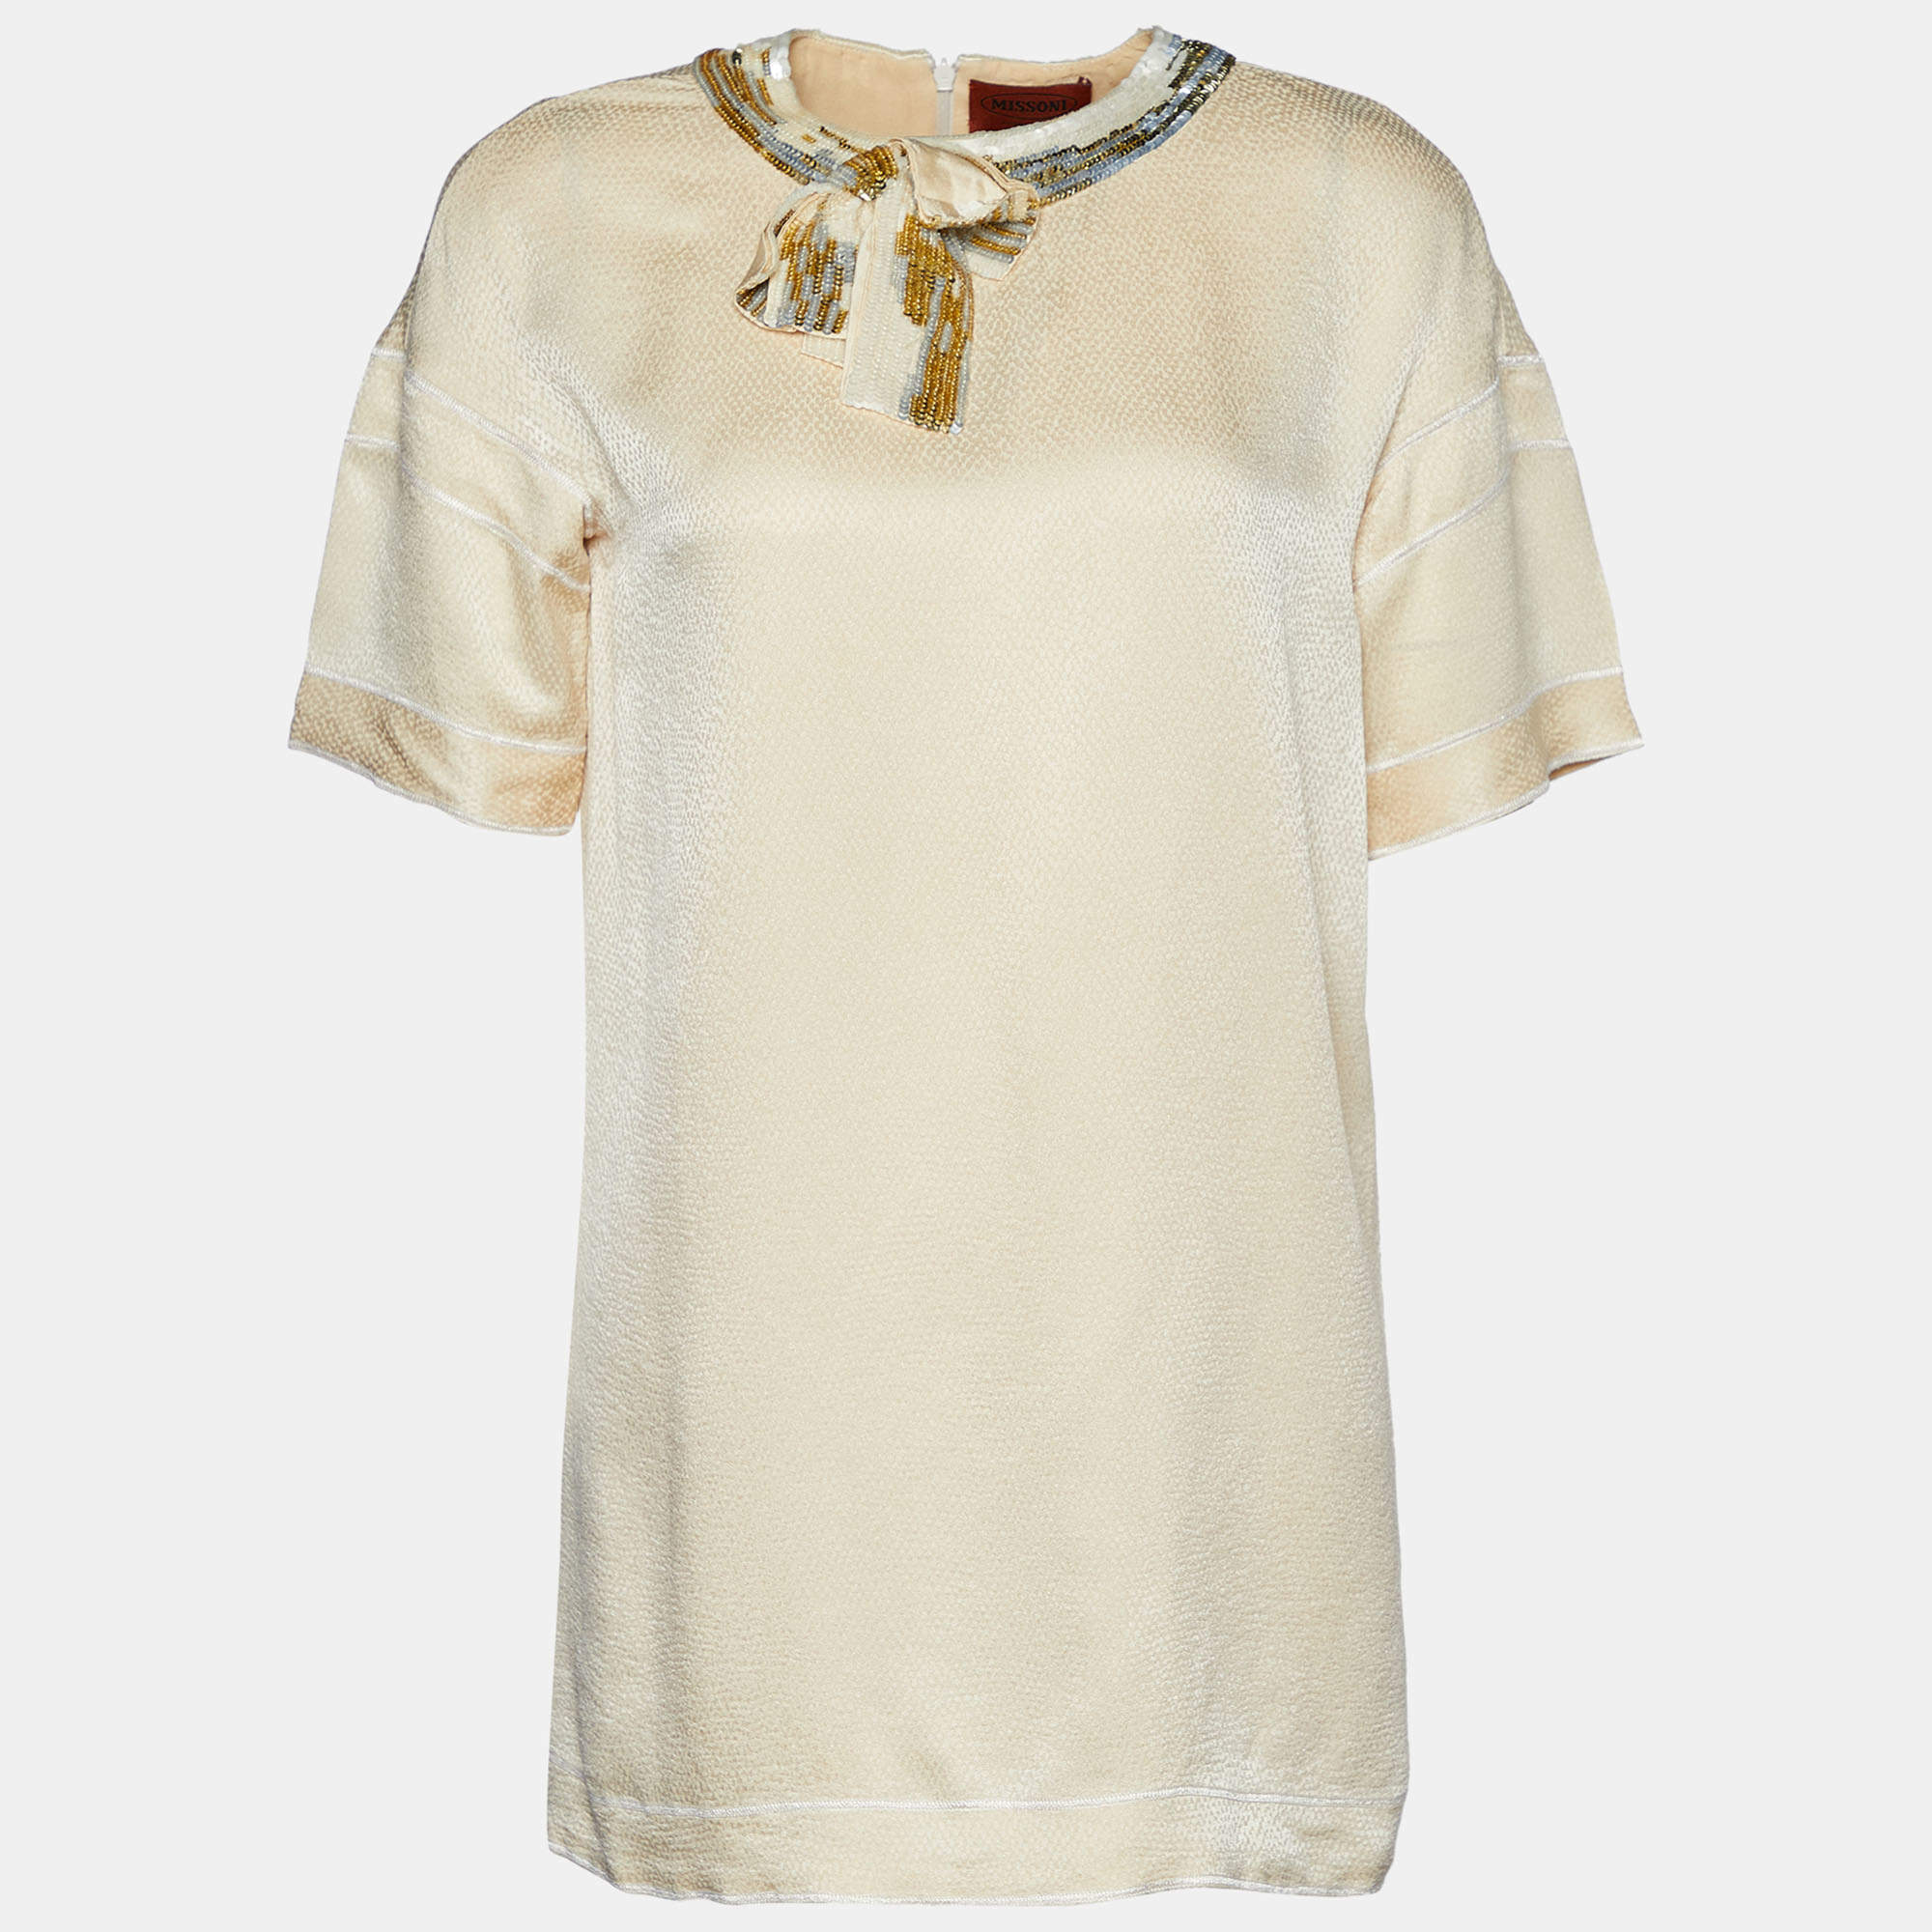 Missoni Cream Patterned Silk Sequin Bow Detail Top S